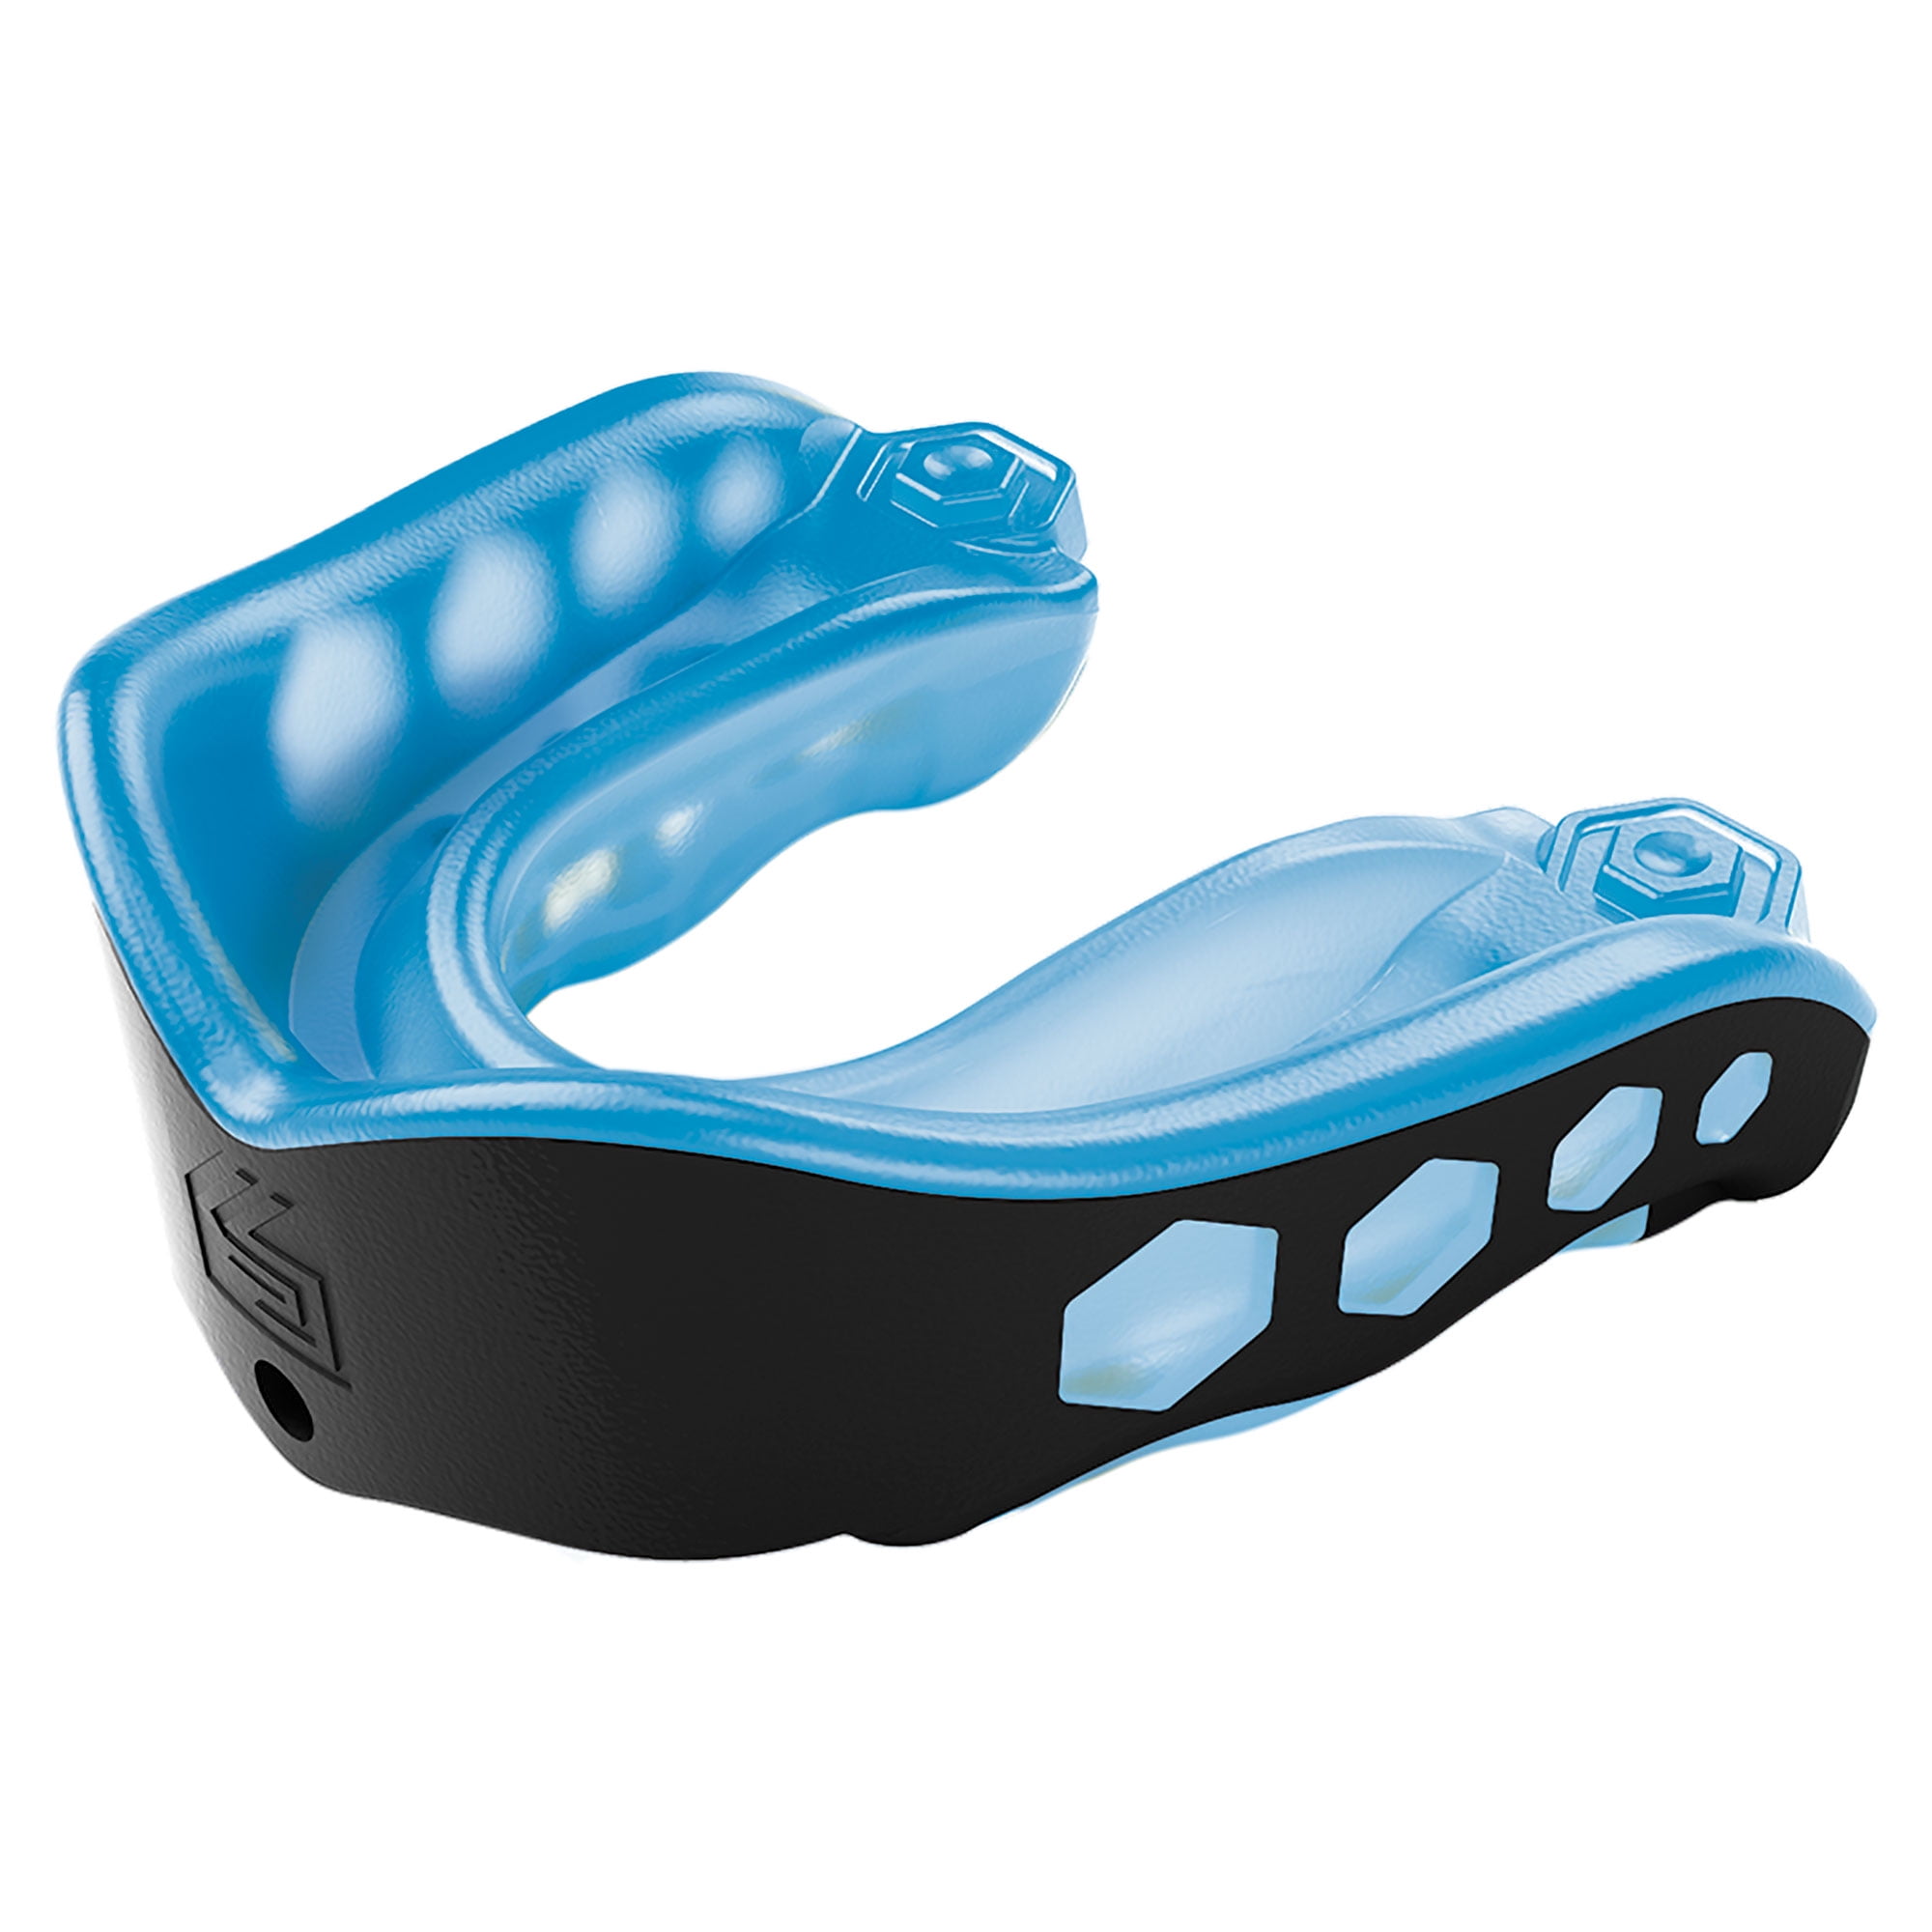 Shockdoctor Ultra Boxing Rugby Mouthguard Gumshield 